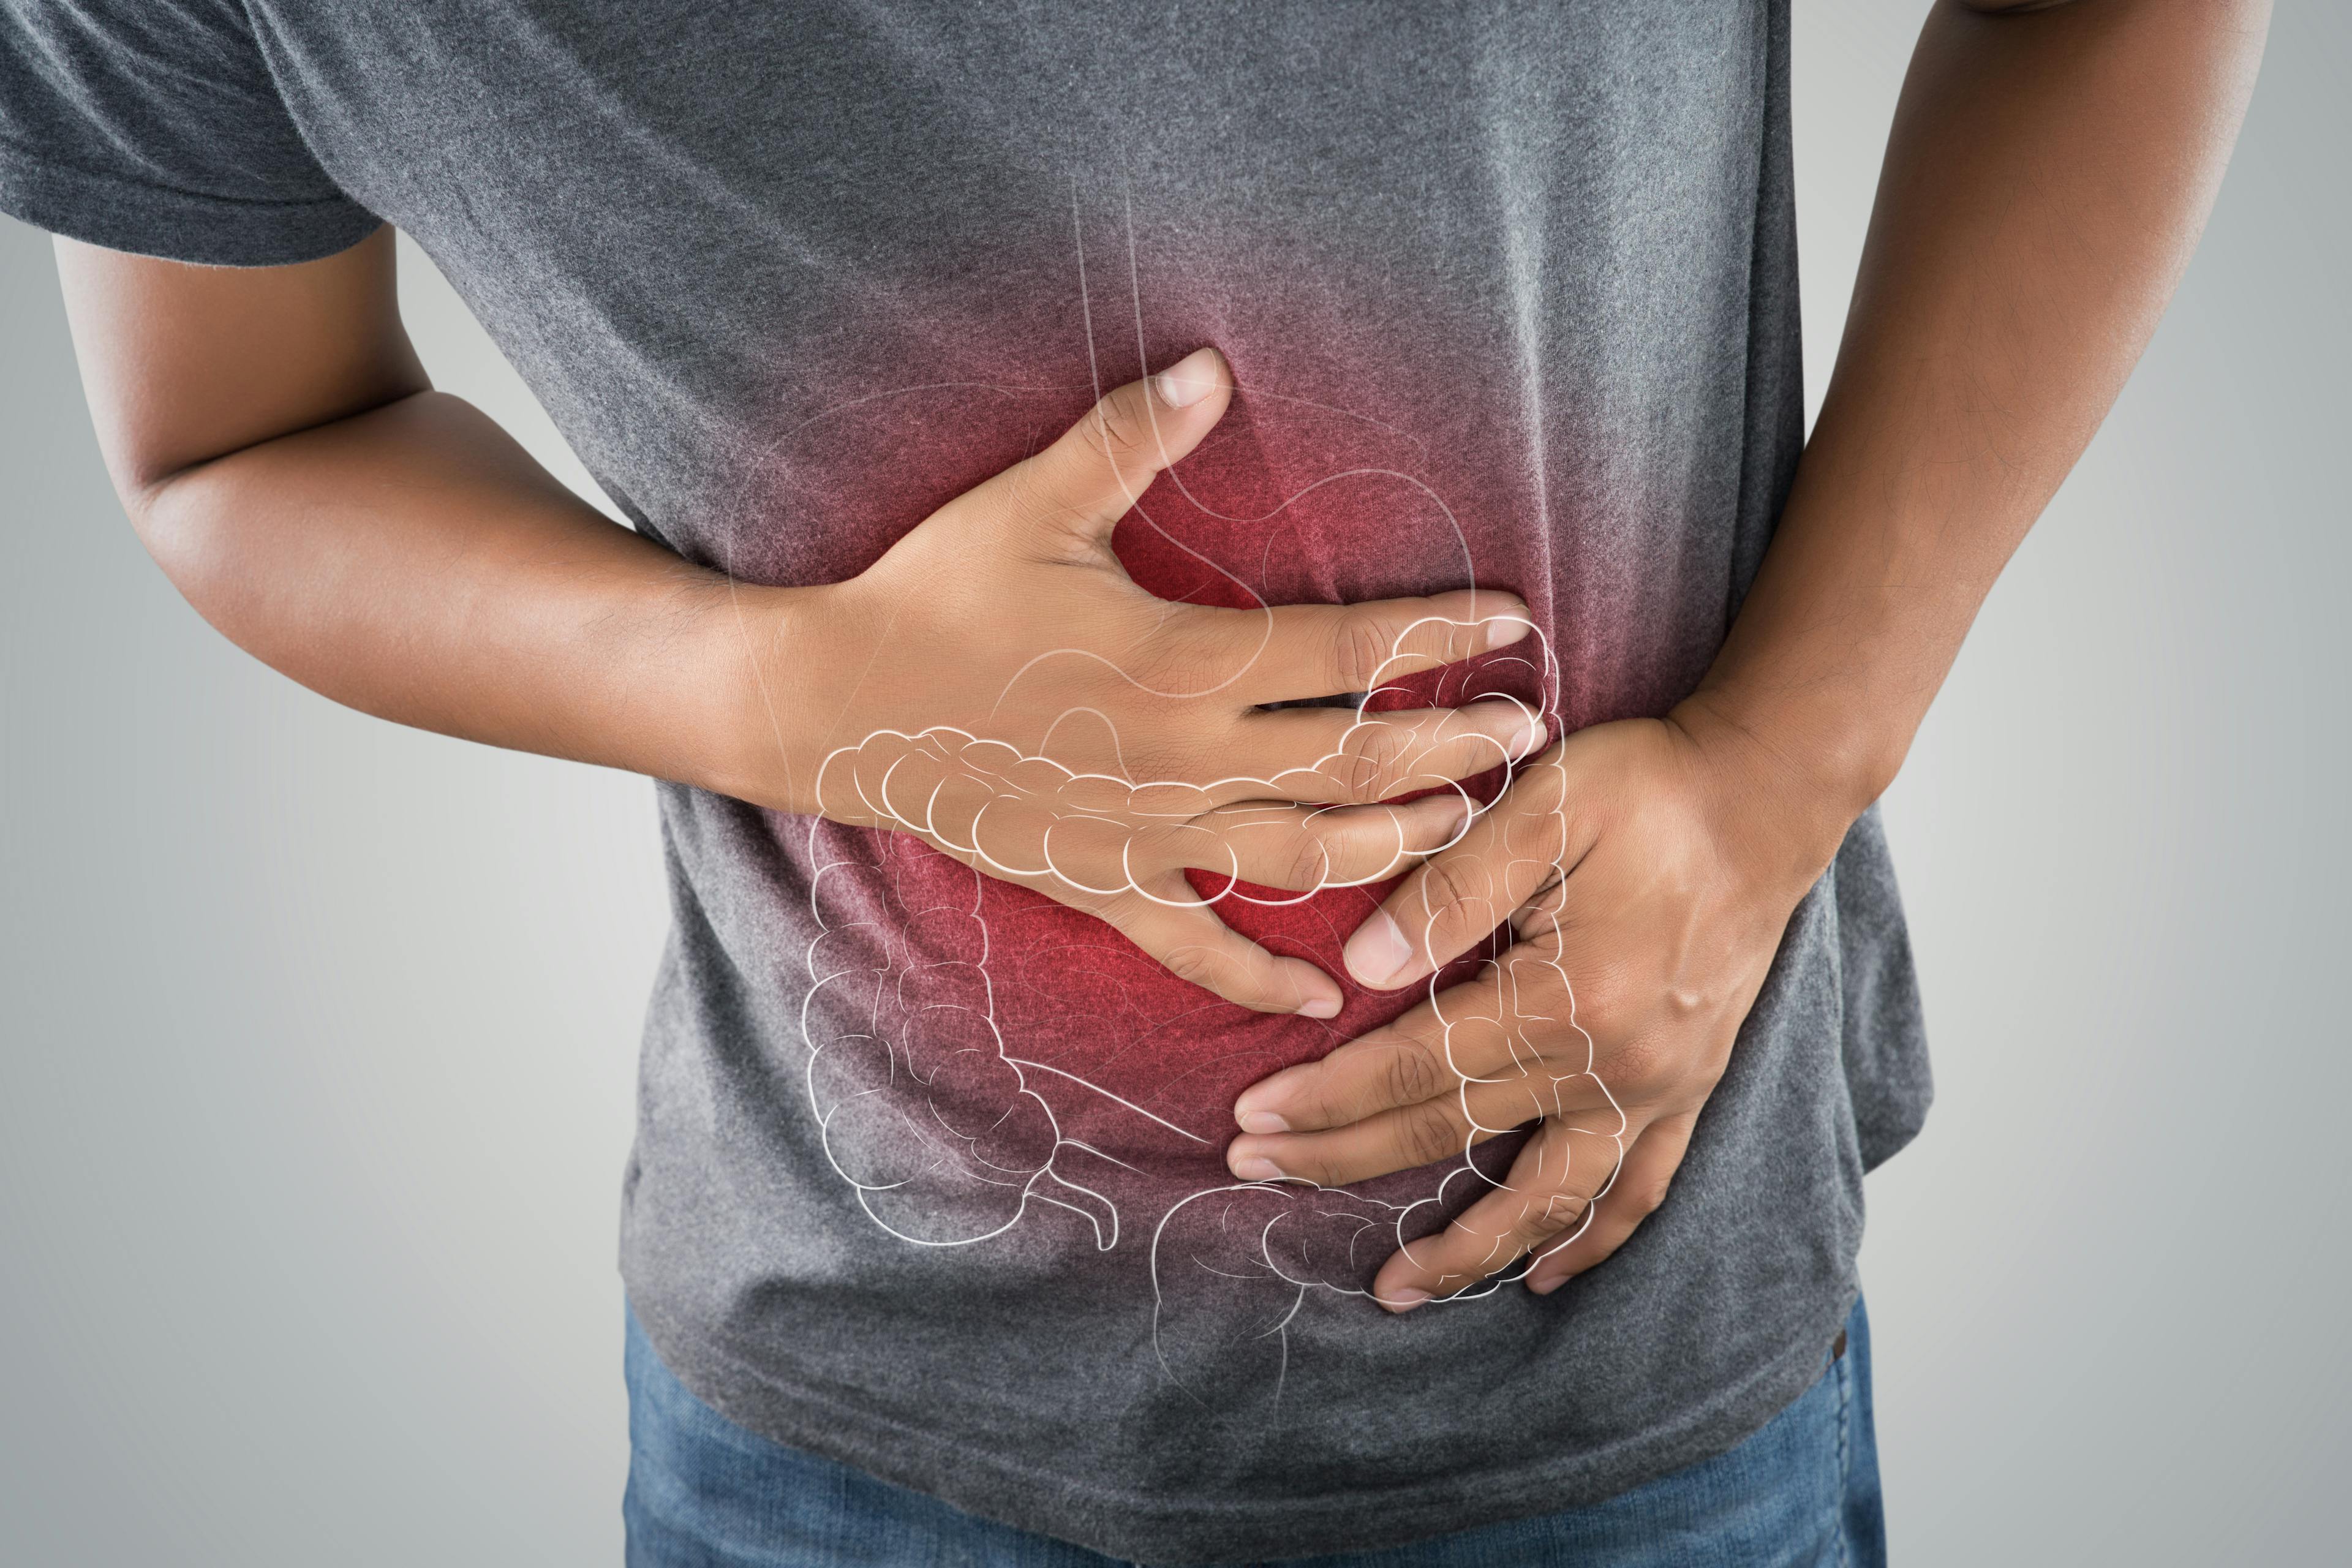 Man holding his stomach due to discomfort from IBS